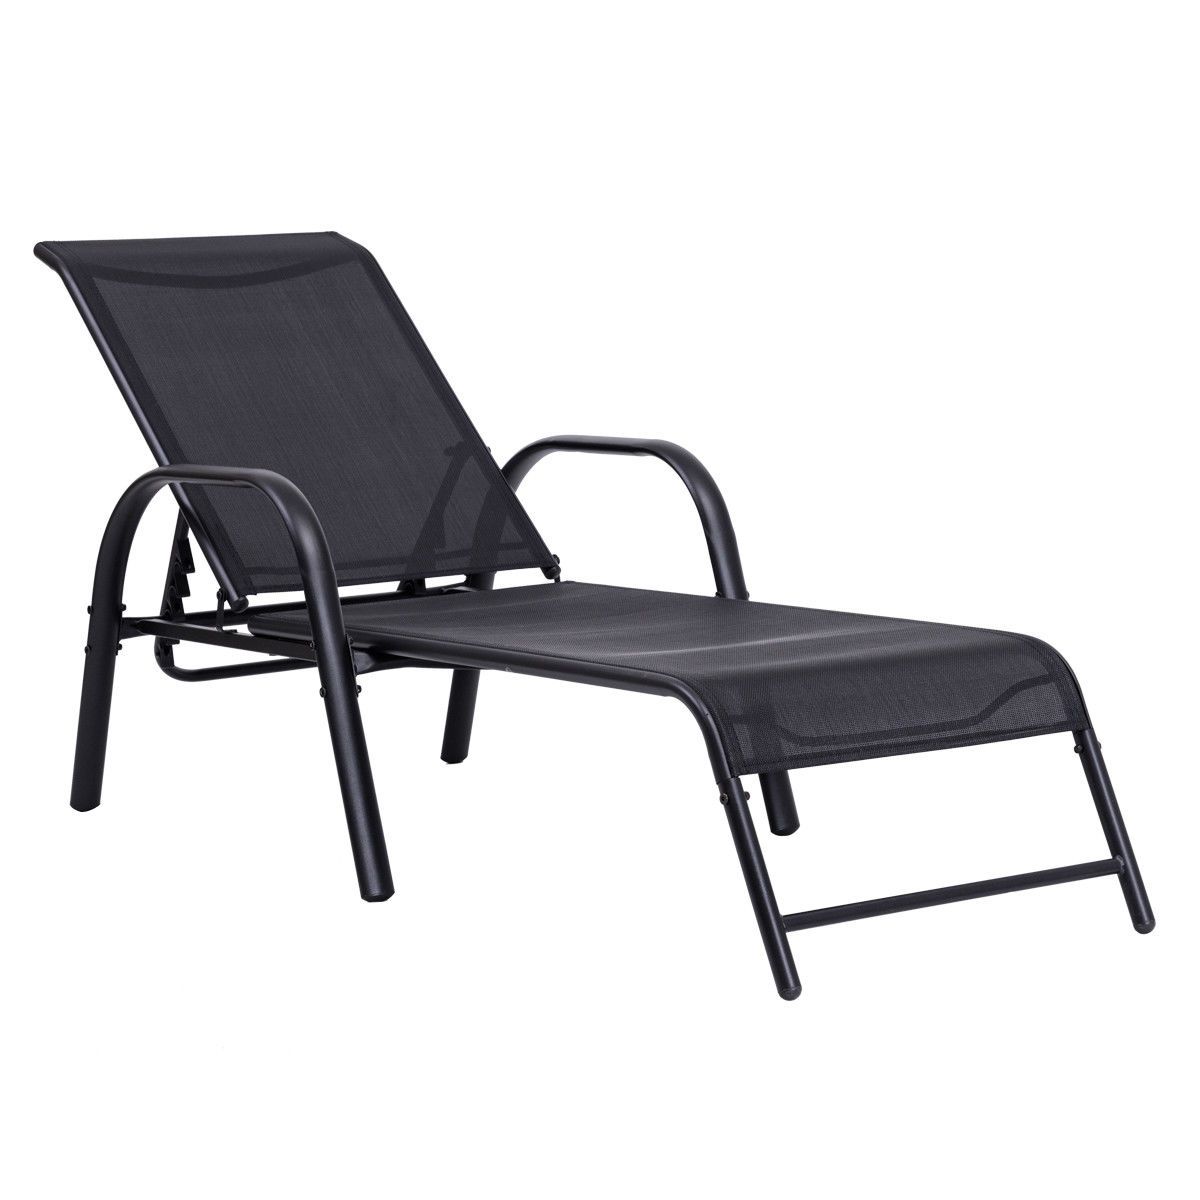 Goplus Outdoor Patio Chaise Lounge Chair Sling Lounges Recliner Adjustable  Back With Regard To Famous Fabric Reclining Outdoor Chaise Lounges (View 23 of 25)